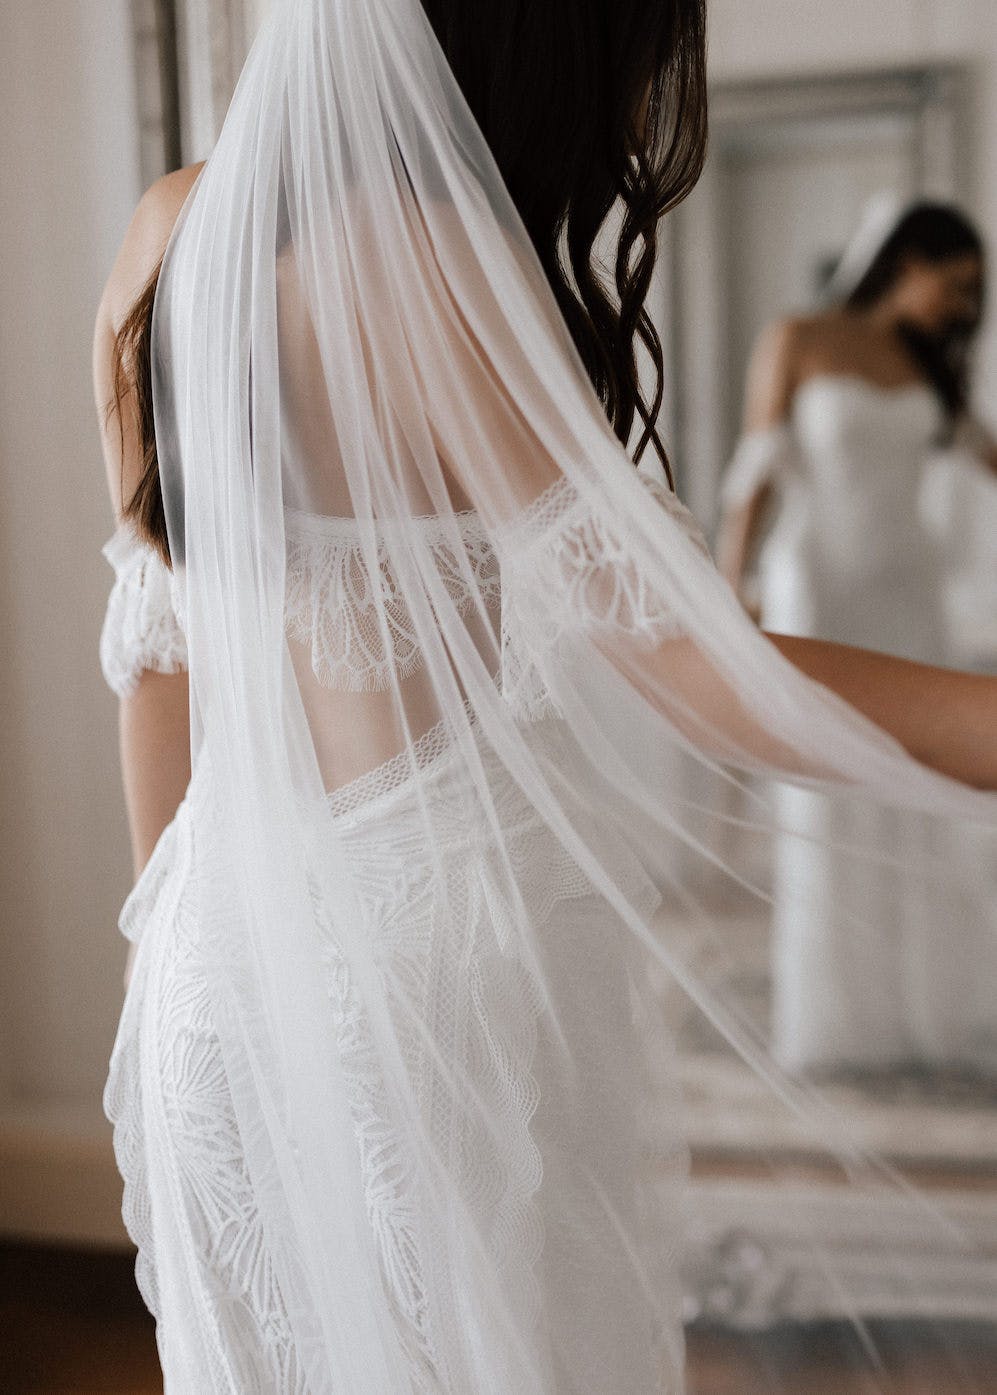 A bride wearing a white lace wedding dress and sheer veil stands with her back to the camera. Her reflection is visible in a large mirror. The room has soft lighting, giving the scene an ethereal feel.